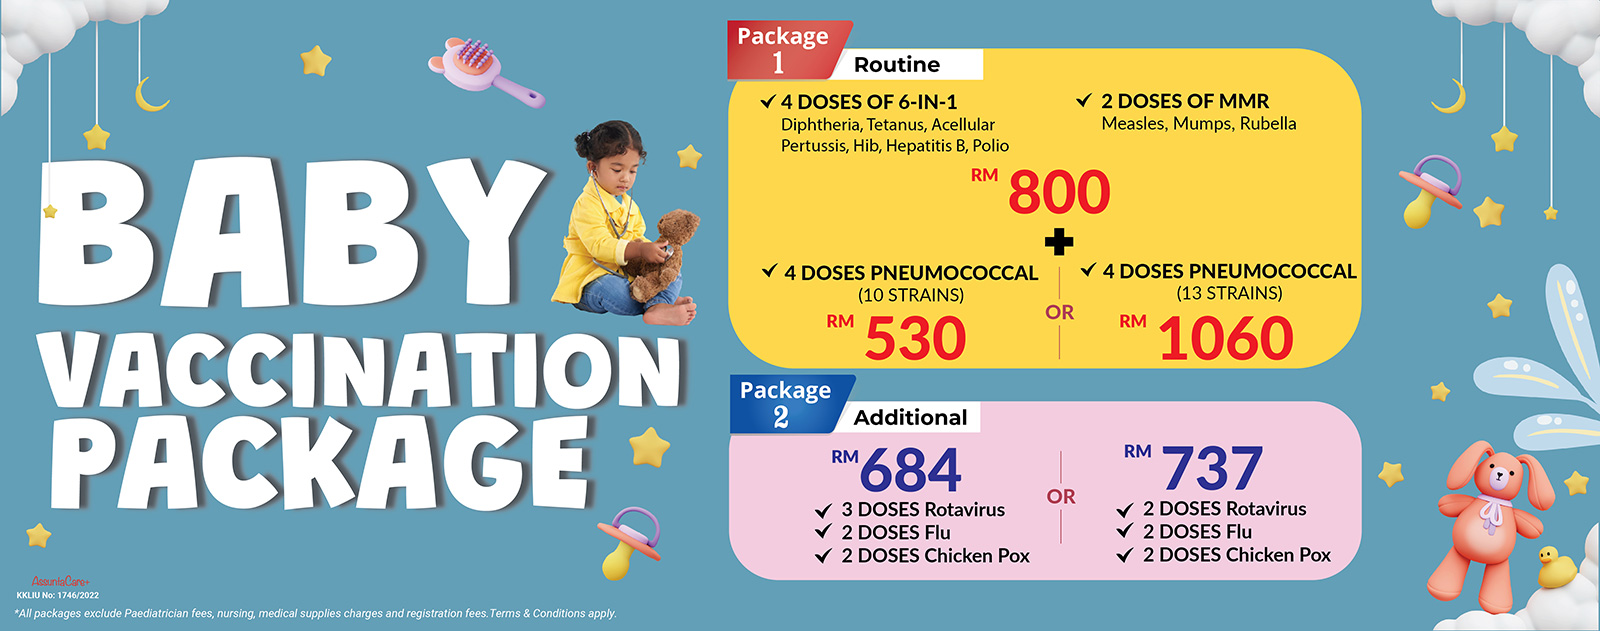 Baby-Vaccination-Package-120523-sld